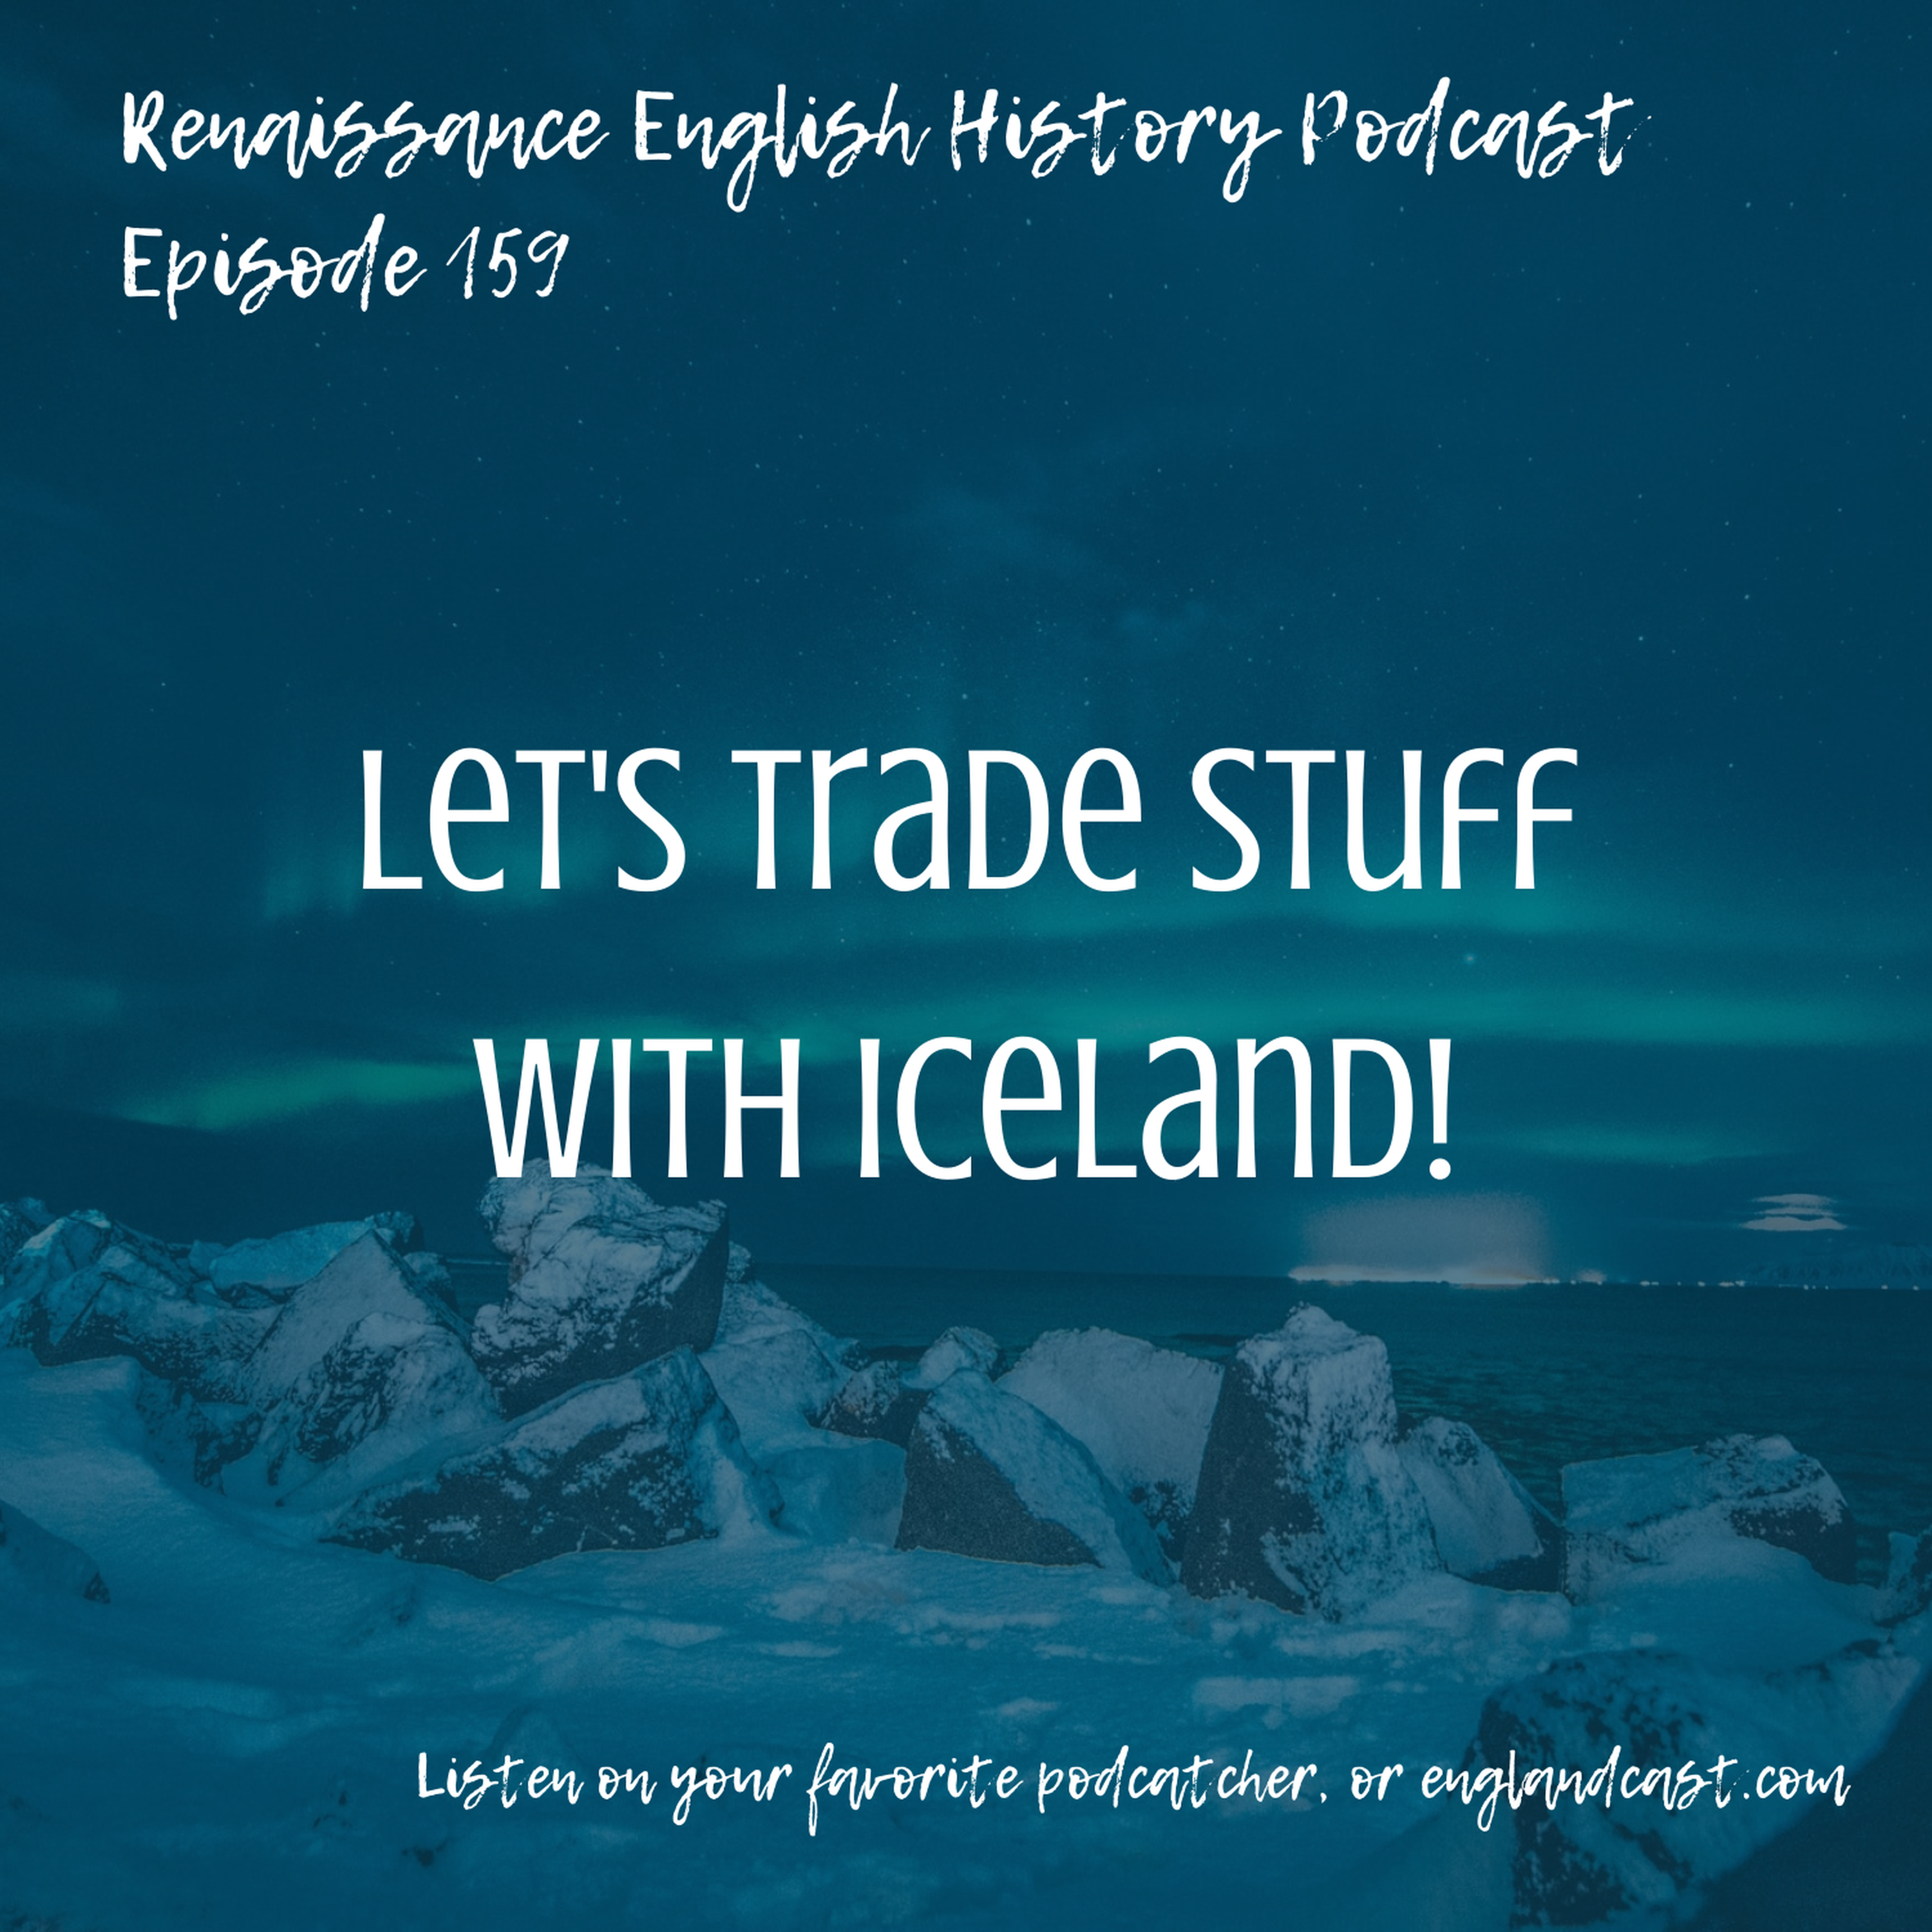 Episode 159: Let's Trade Stuff with Iceland!